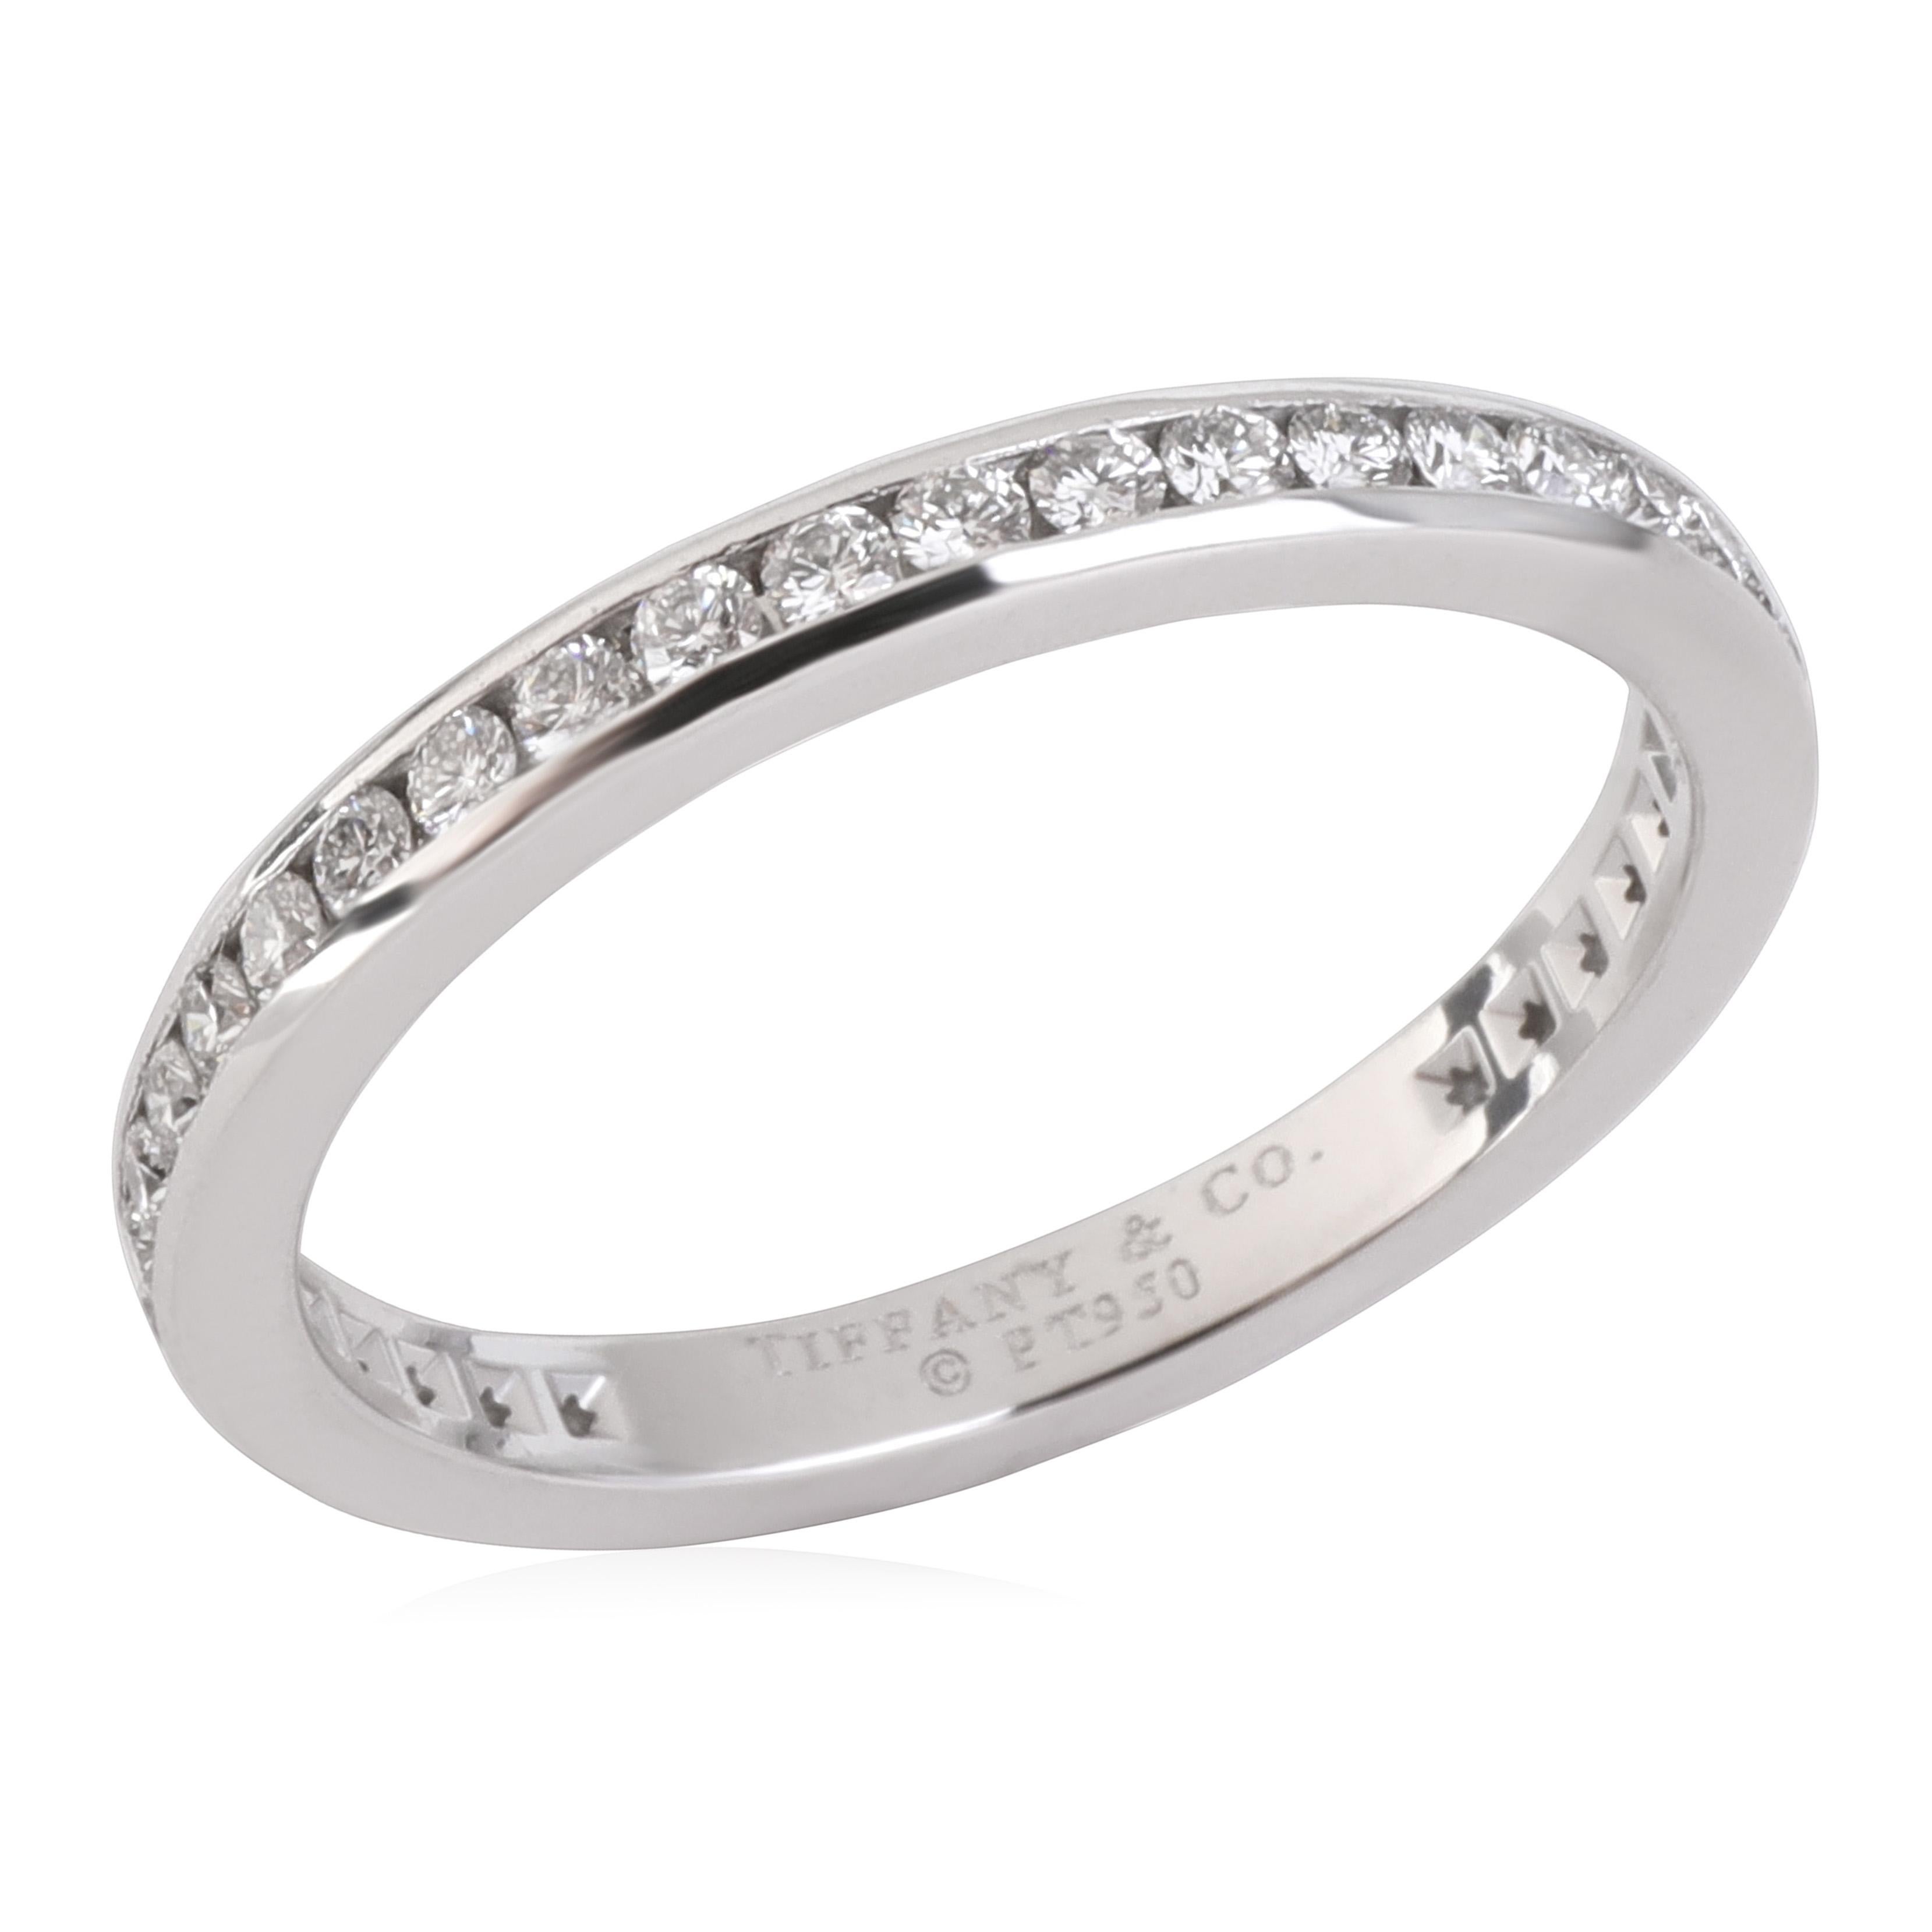 Tiffany & Co. Channel Set Diamond Eternity Band in Platinum 0.42 CTW

PRIMARY DETAILS
SKU: 119475
Listing Title: Tiffany & Co. Channel Set Diamond Eternity Band in Platinum 0.42 CTW
Condition Description: Retails for 3825 USD. In excellent condition